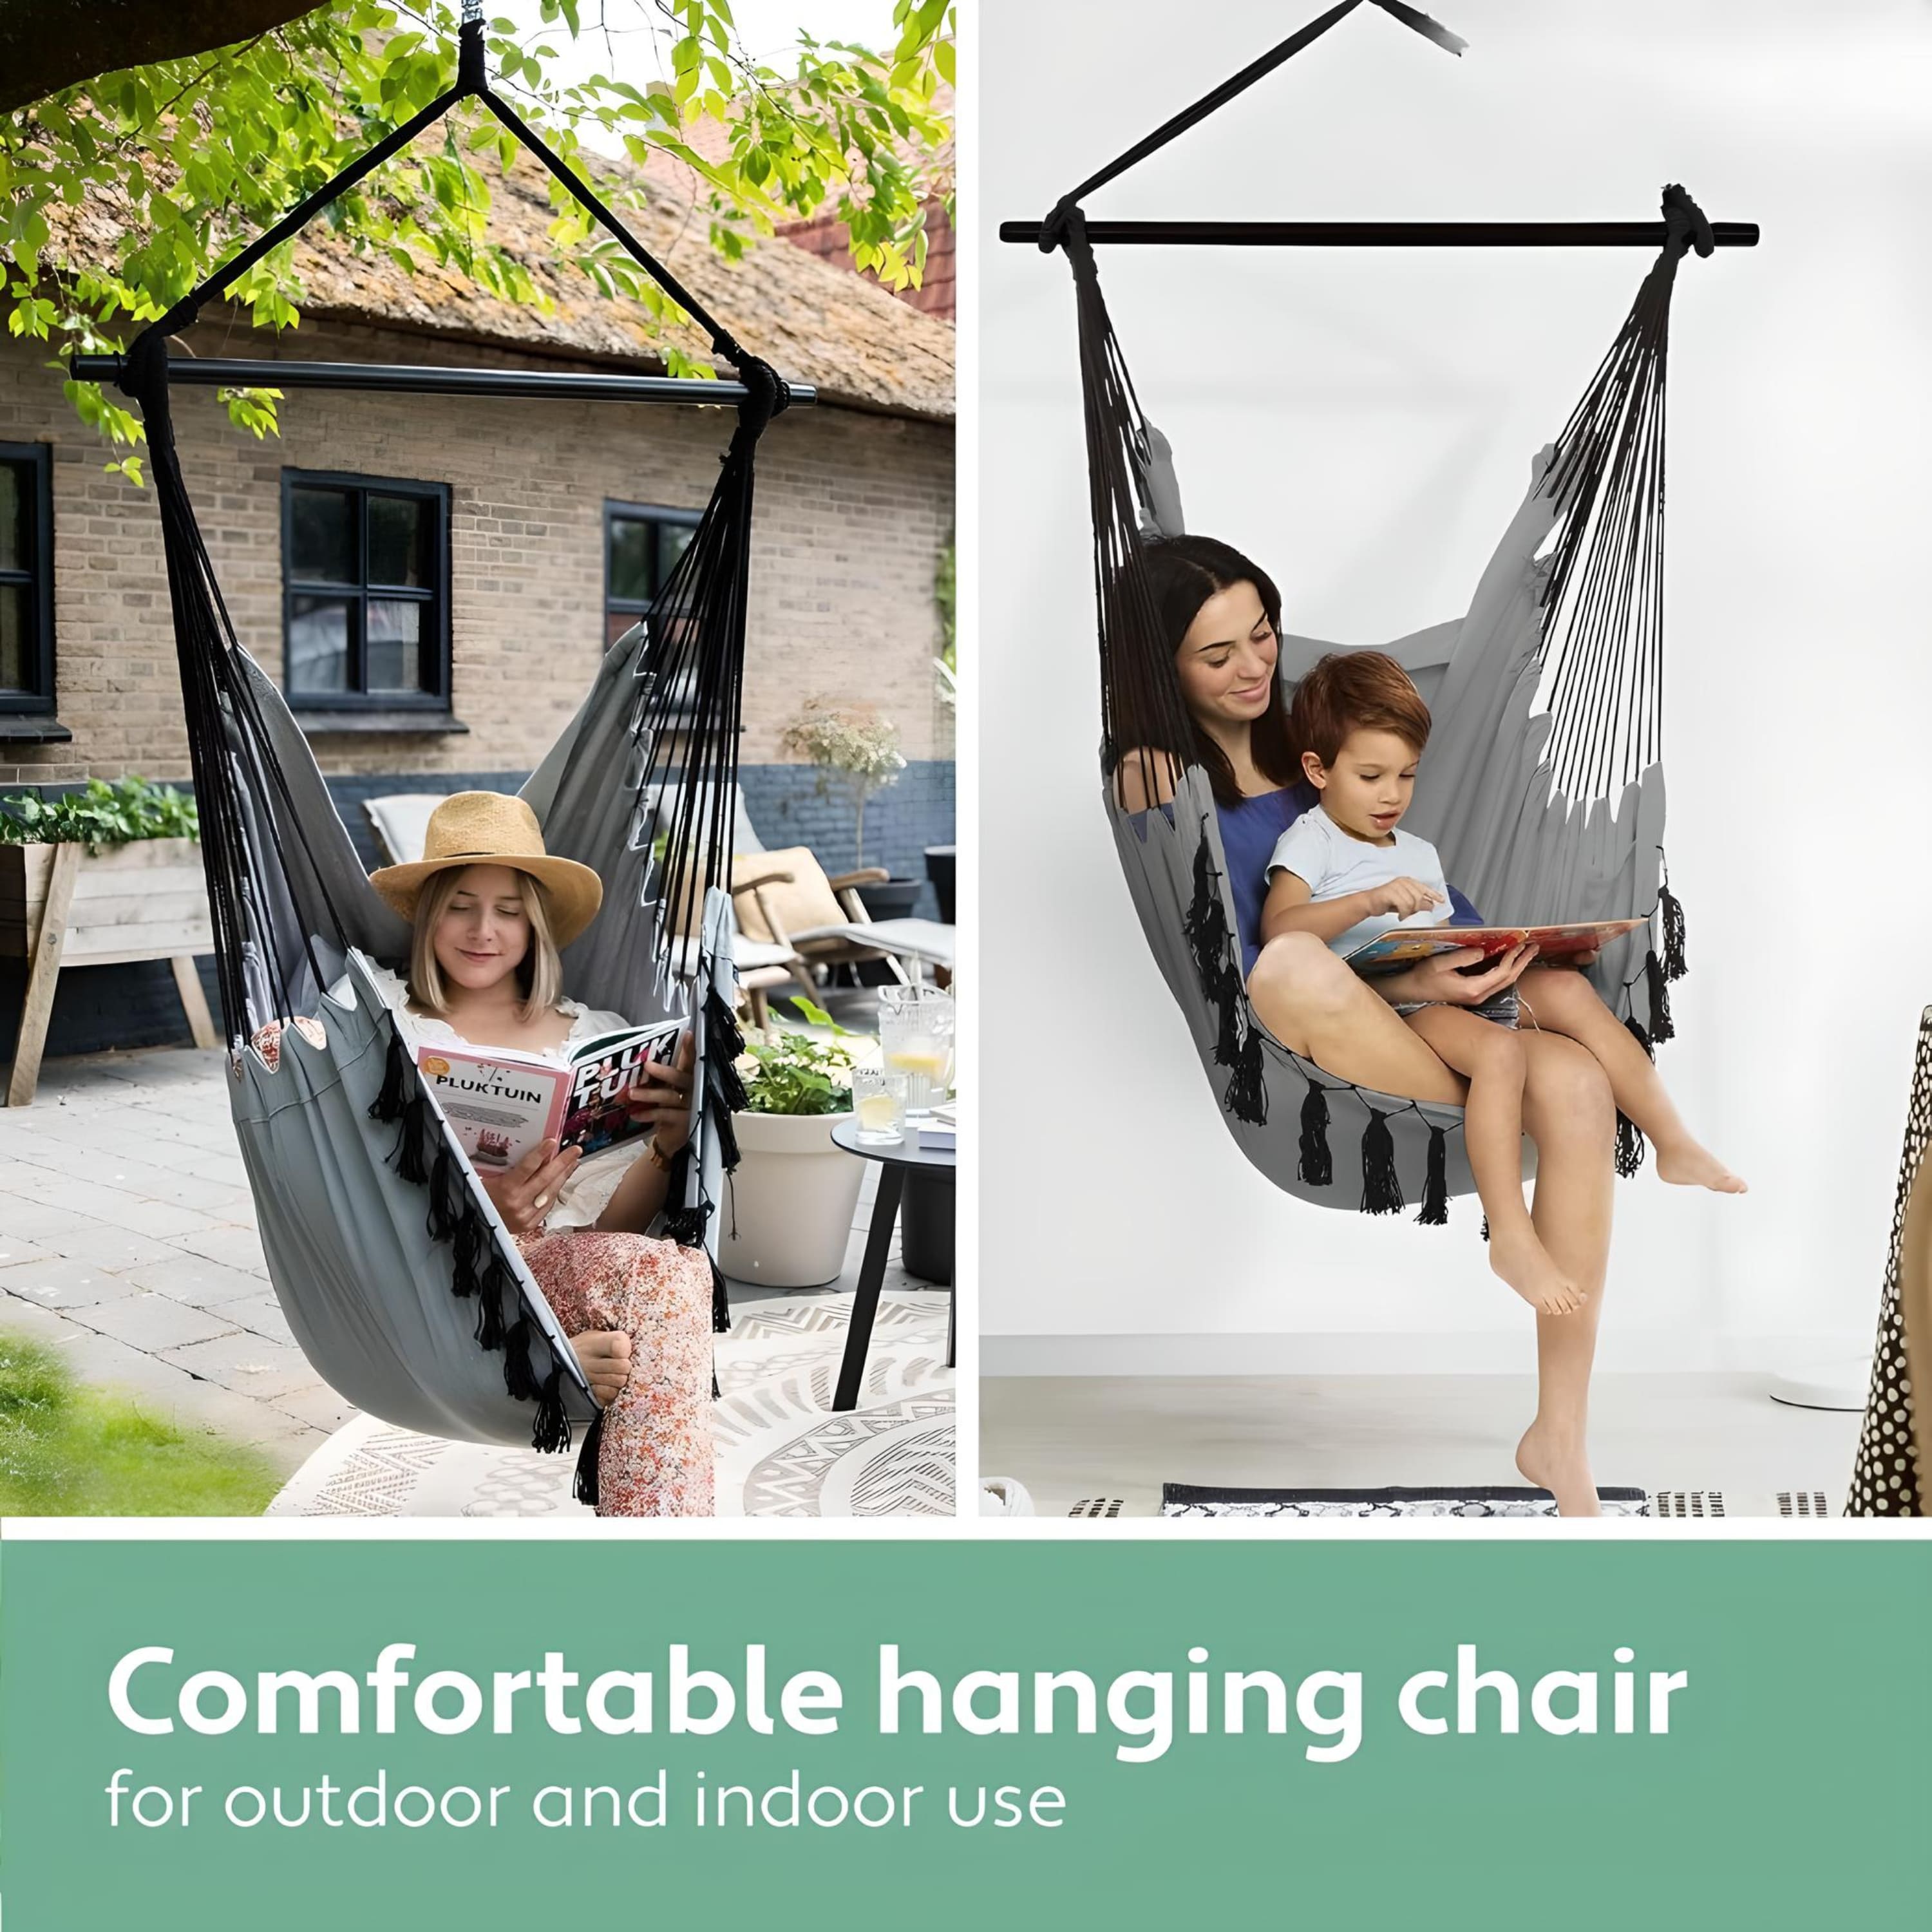 hanging-swing-chair-with-girl-sitting